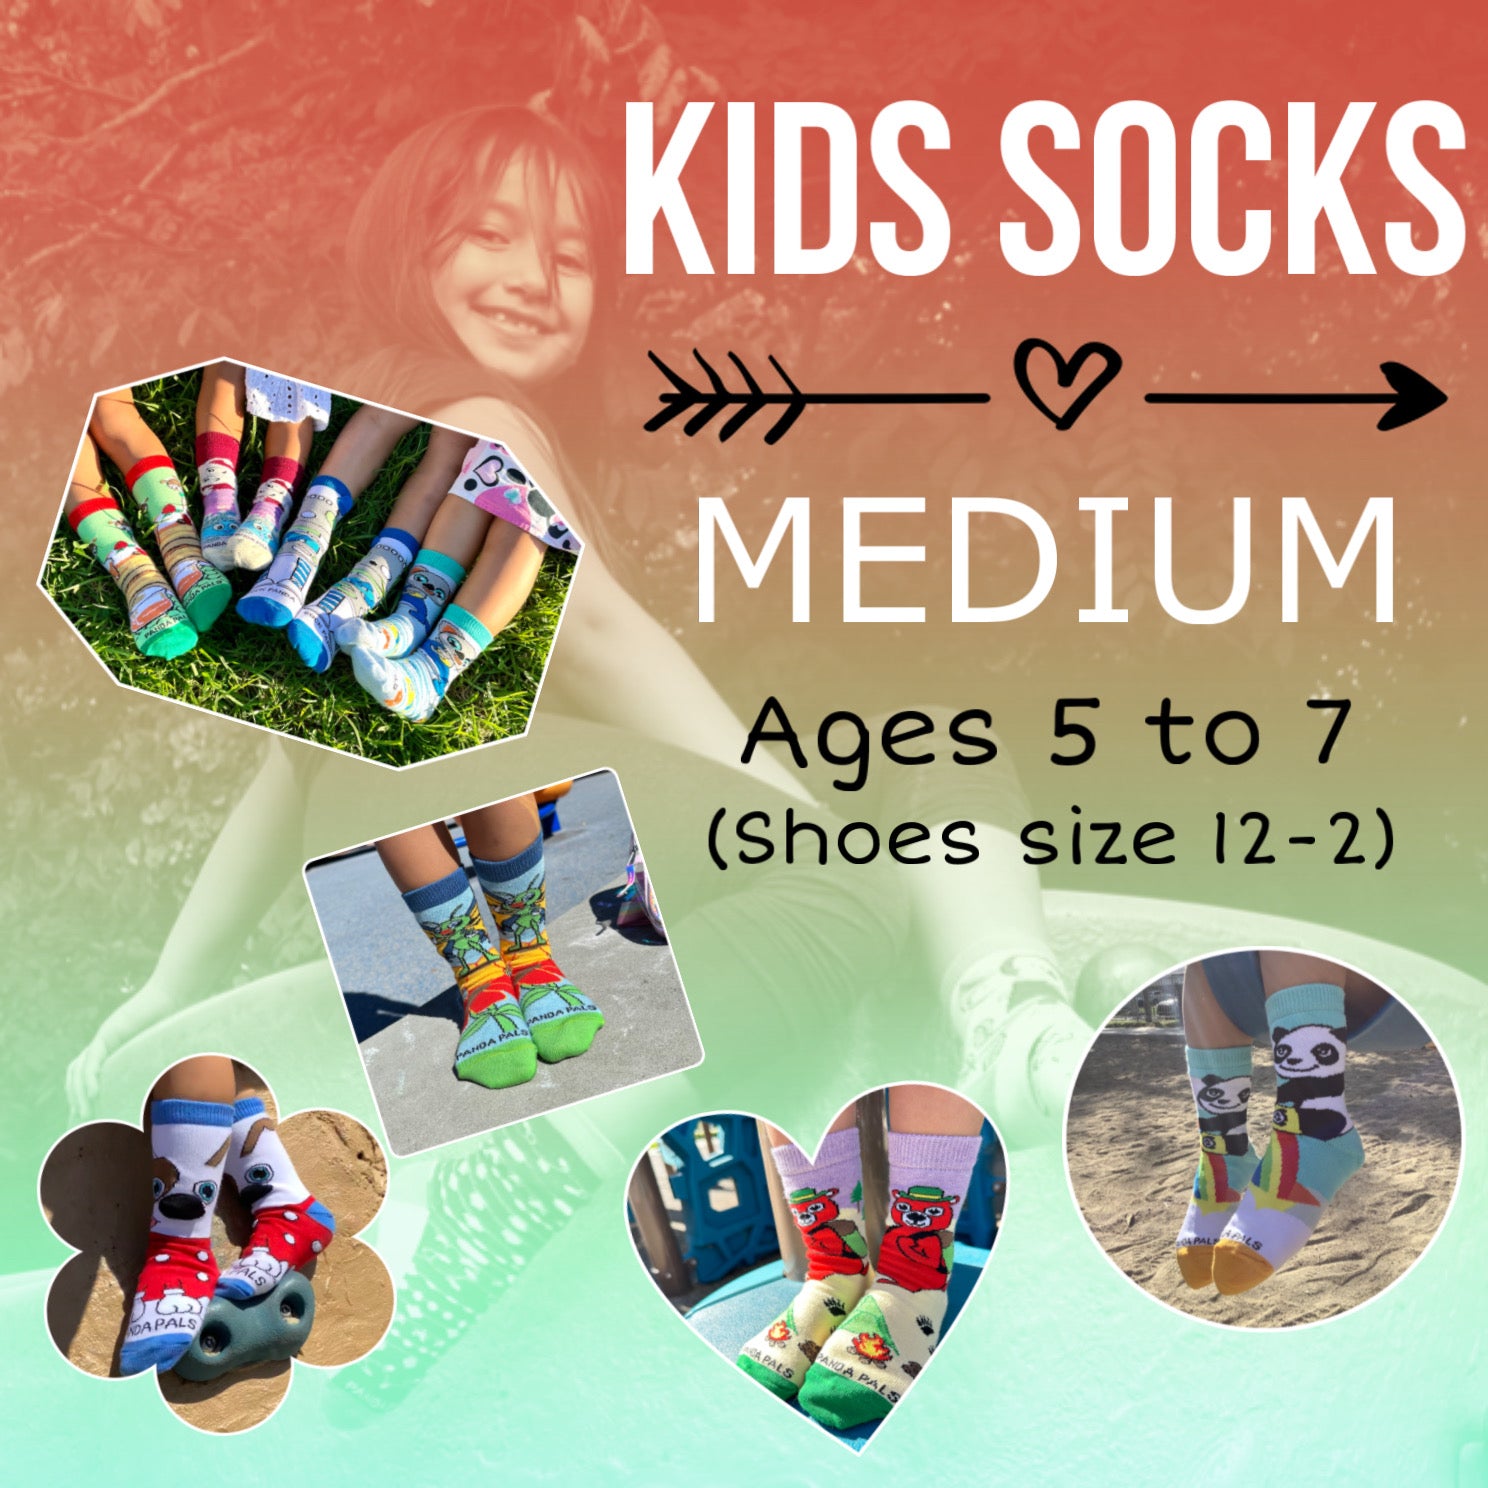 Gift Sets (4-Pack) - Ages 3-7